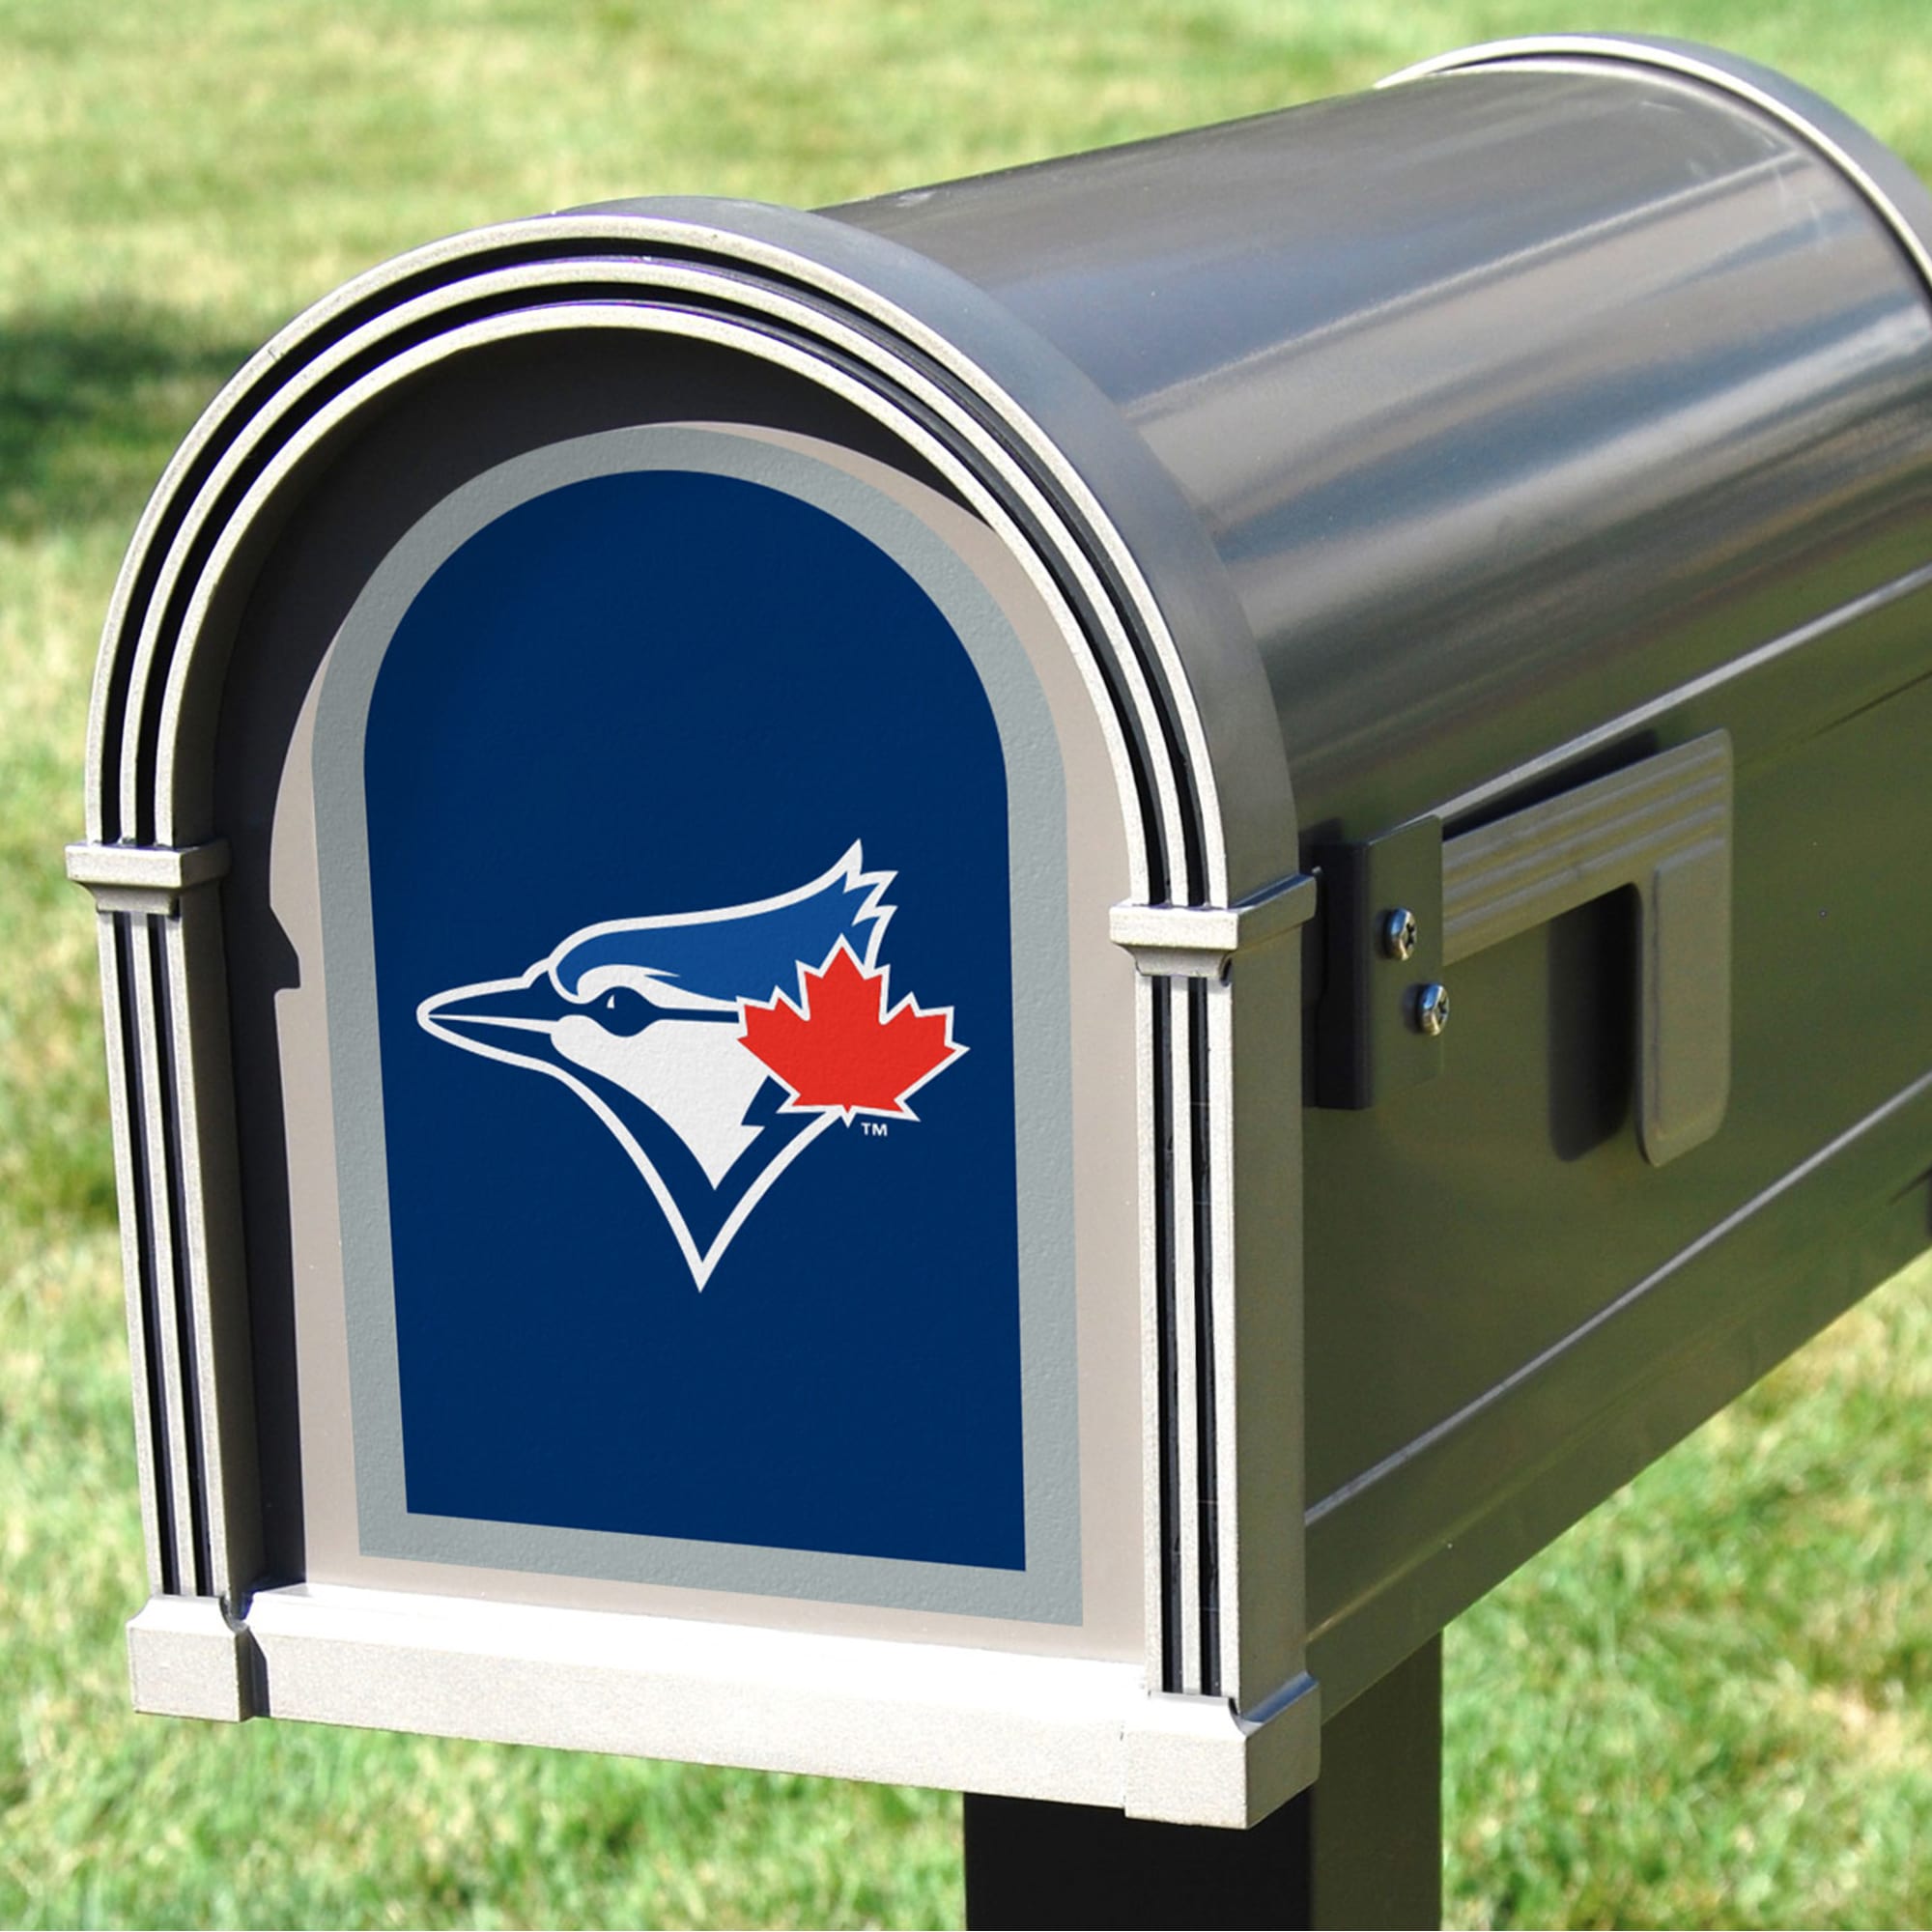 Toronto Blue Jays: Mailbox Logo - Officially Licensed MLB Outdoor Graphic 5.0"W x 8.0"H by Fathead | Wood/Aluminum